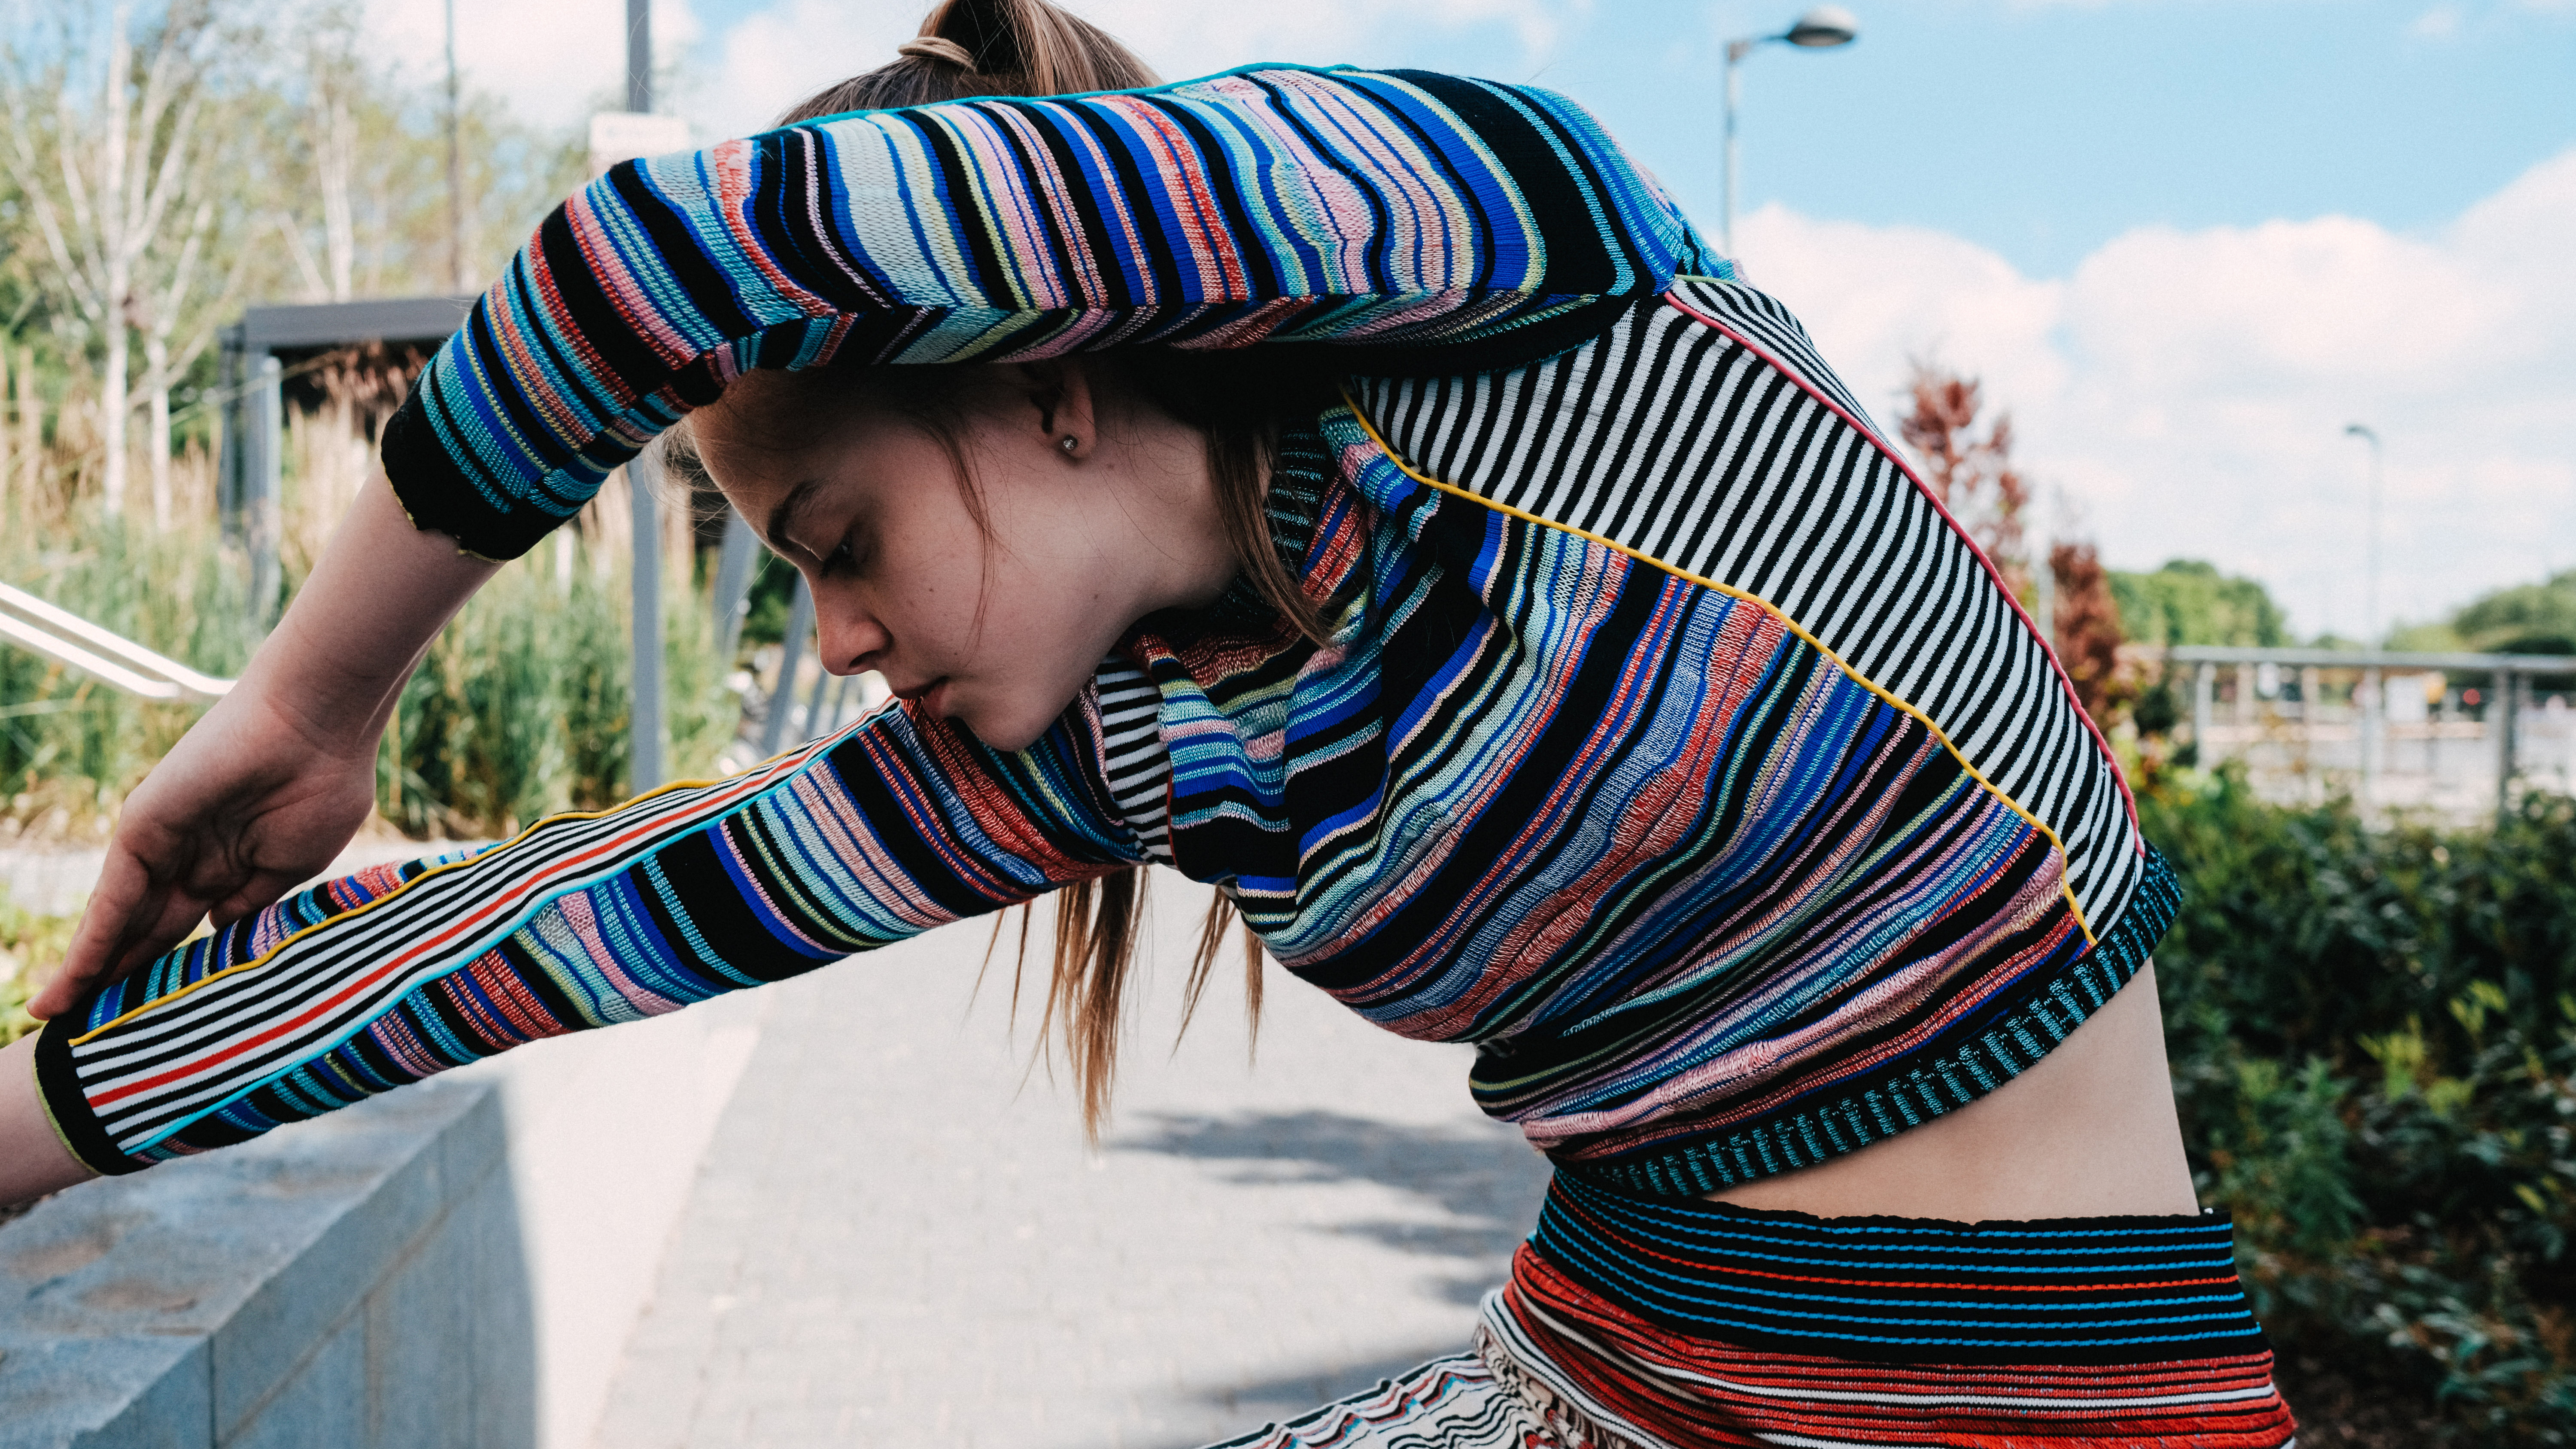 Colourful stripey sportswear knit top and bottom on model by Priscilla Luong - BA Textile Design.